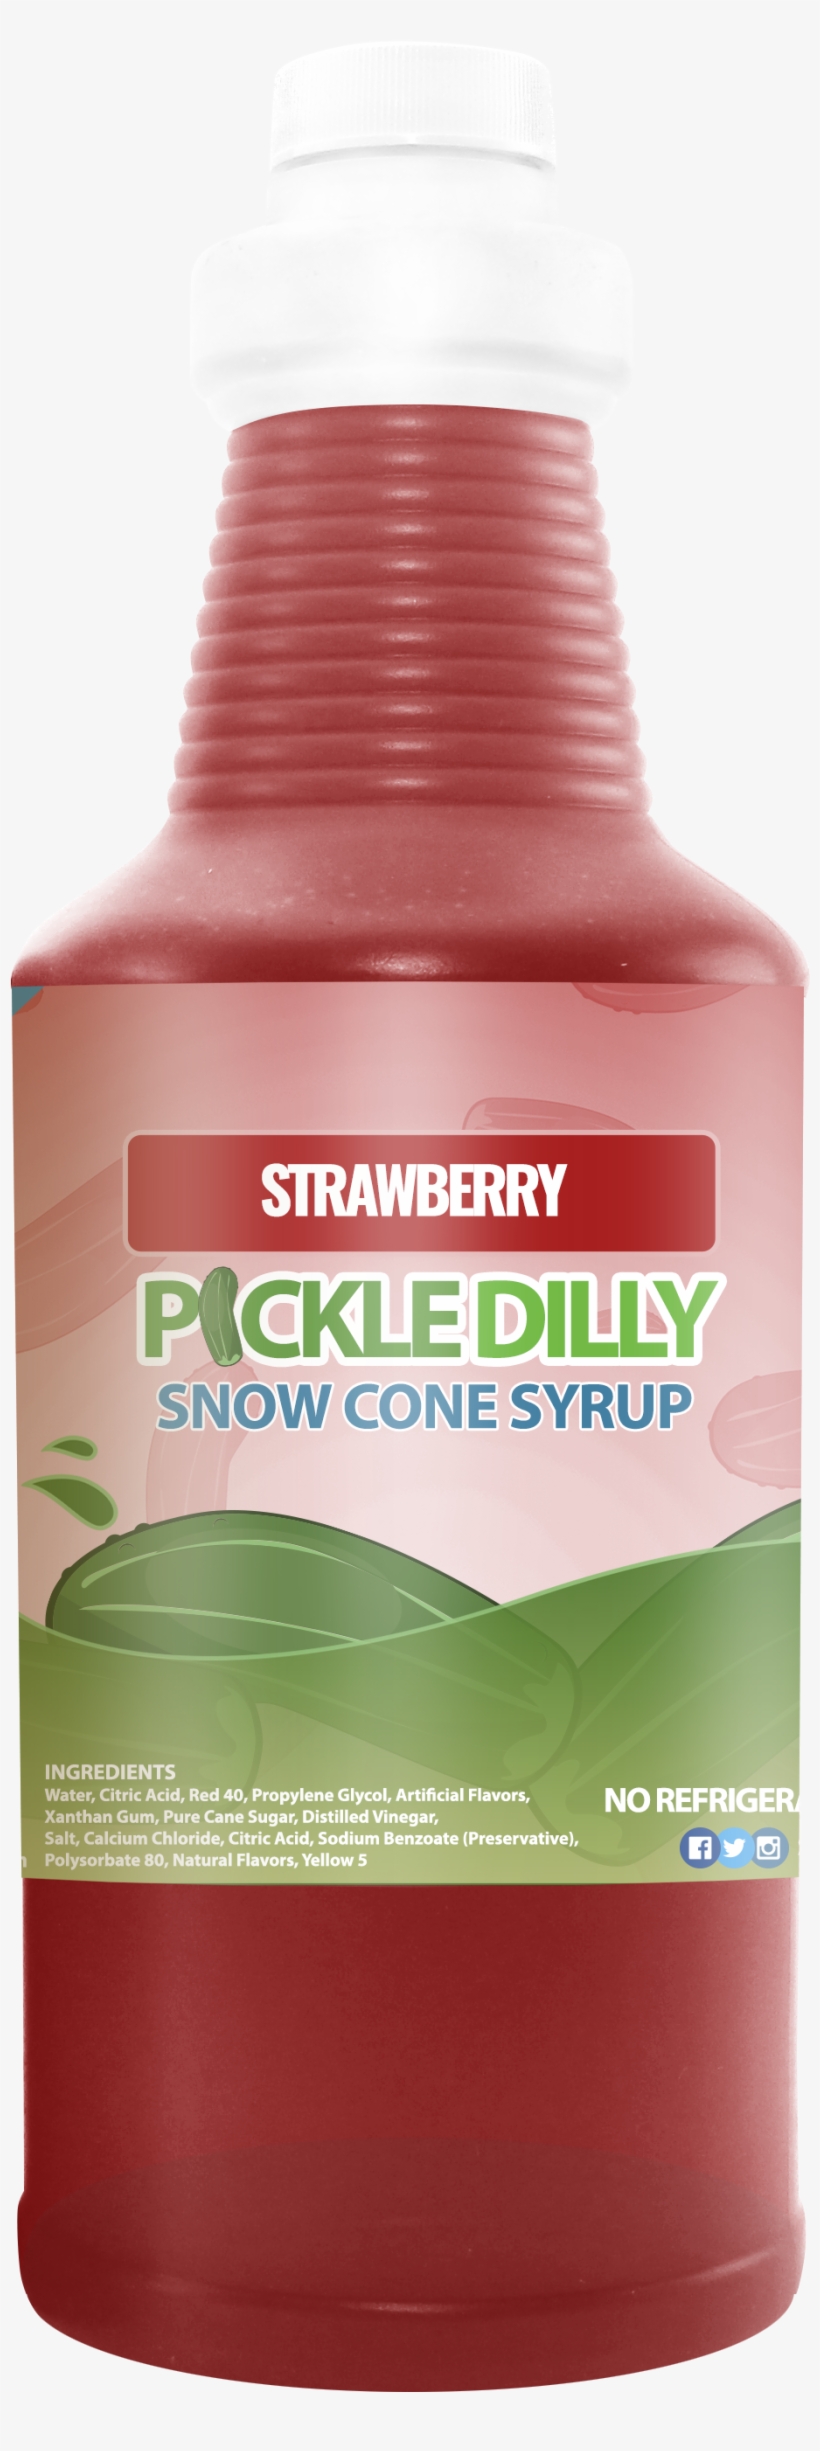 Strawberry Pickle Dilly Snow Cone Syrup - Syrup, transparent png #786348